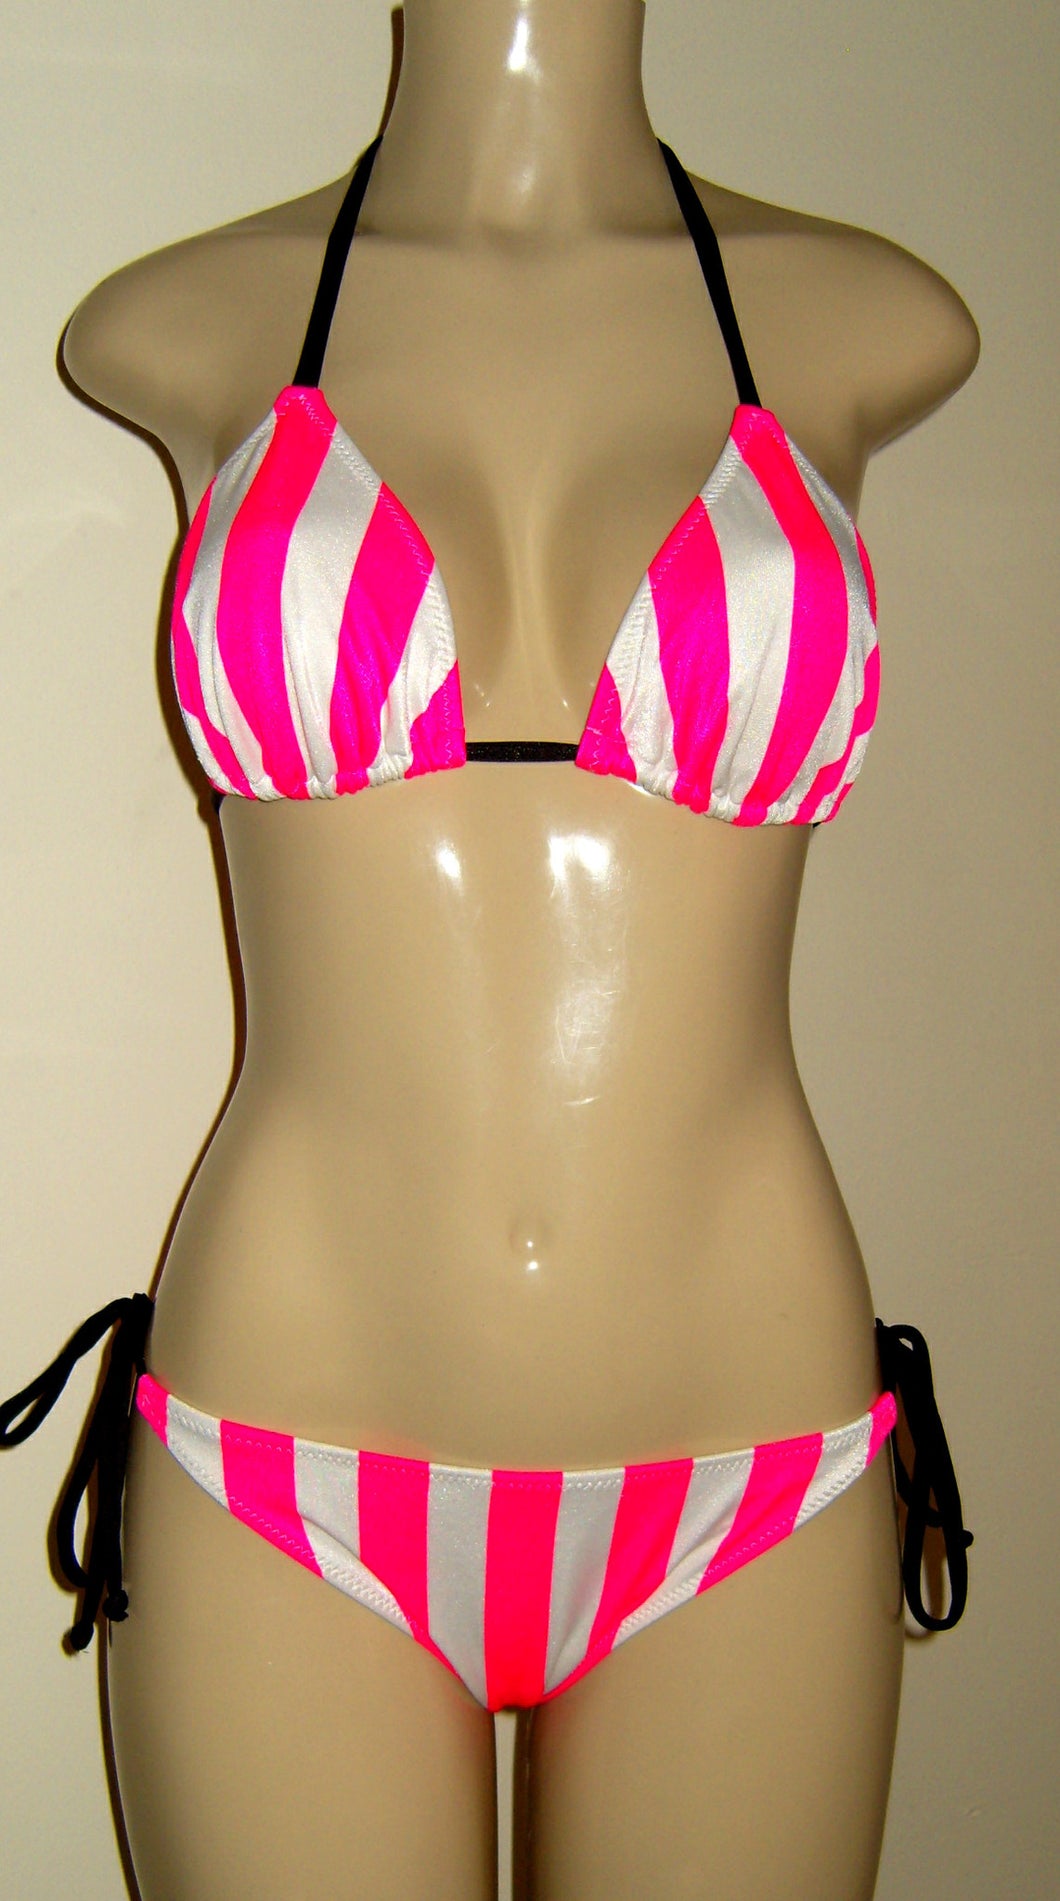 Candy Cane Pink and White stripe bikini with black trim. Triangle top and Single tie bottom with puckers